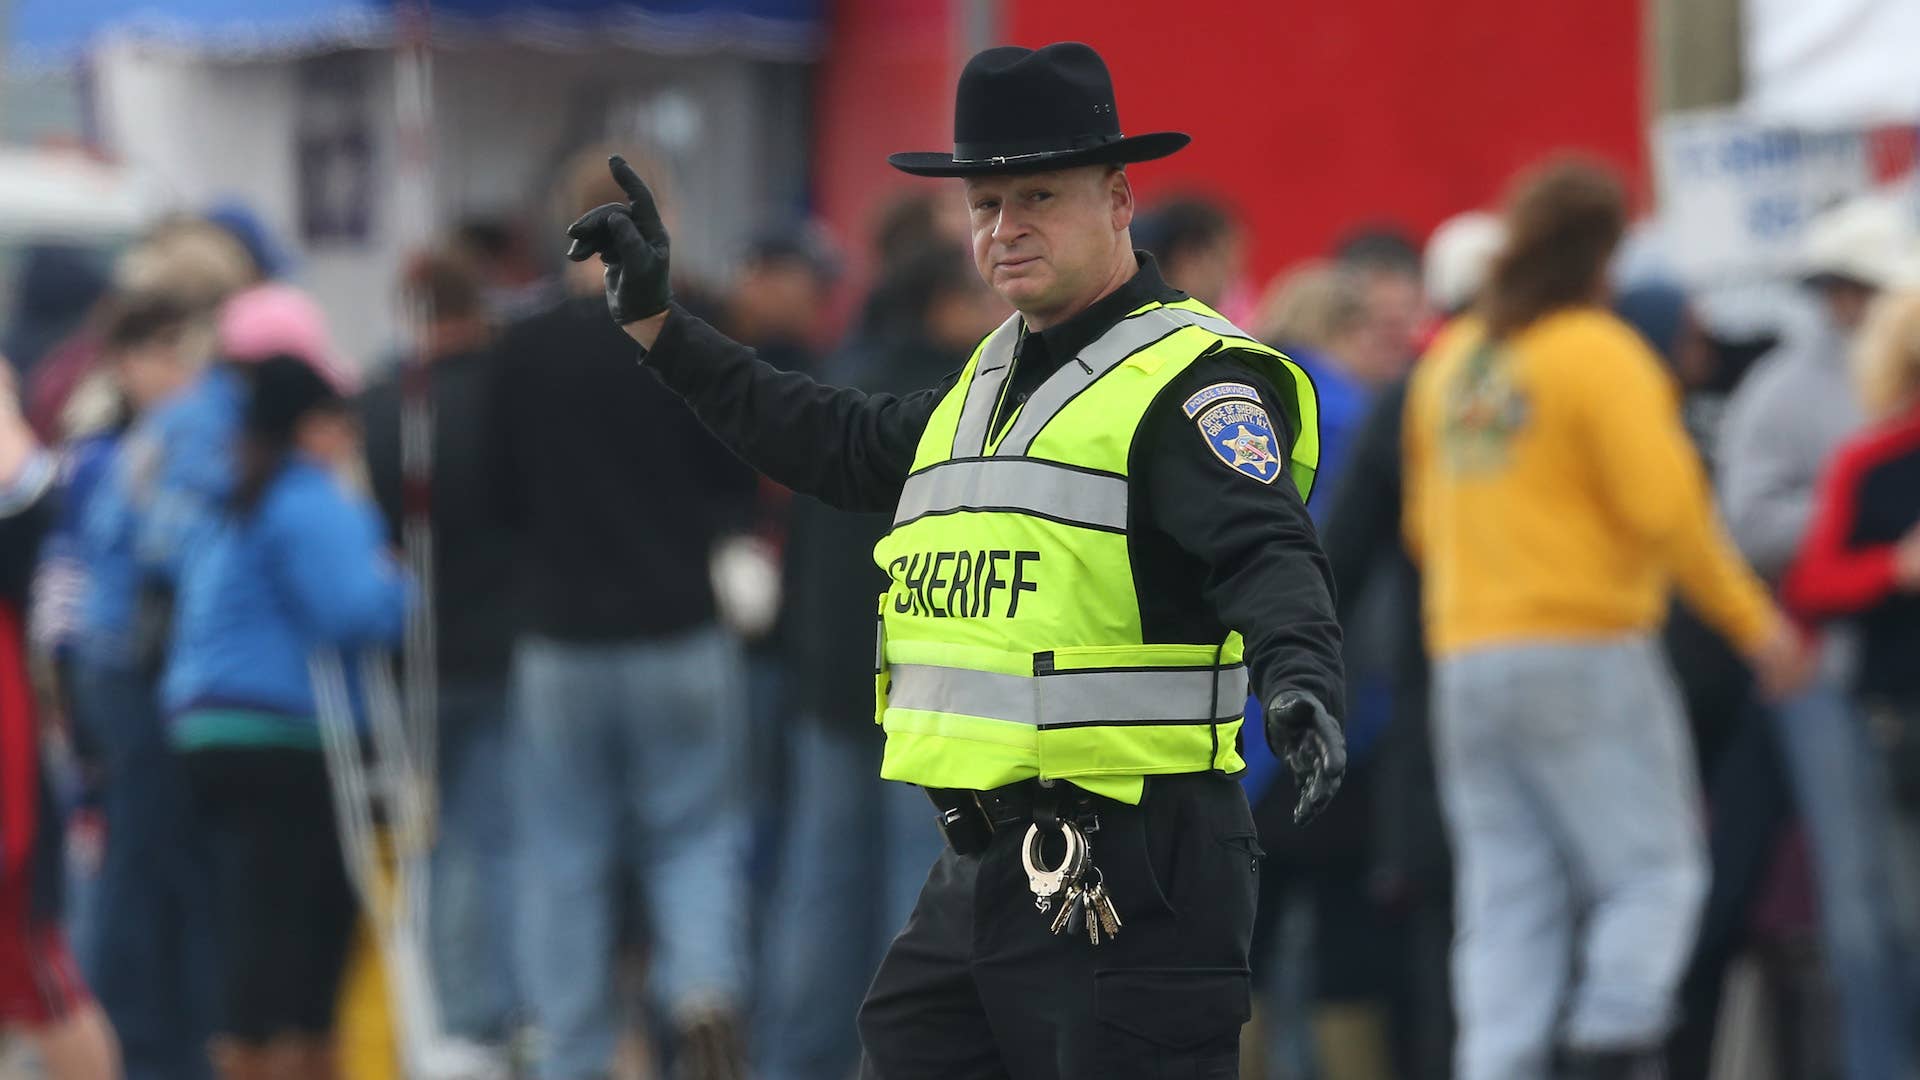 A sheriff directs traffic outside the stadium before the Buffalo Bills NFL game